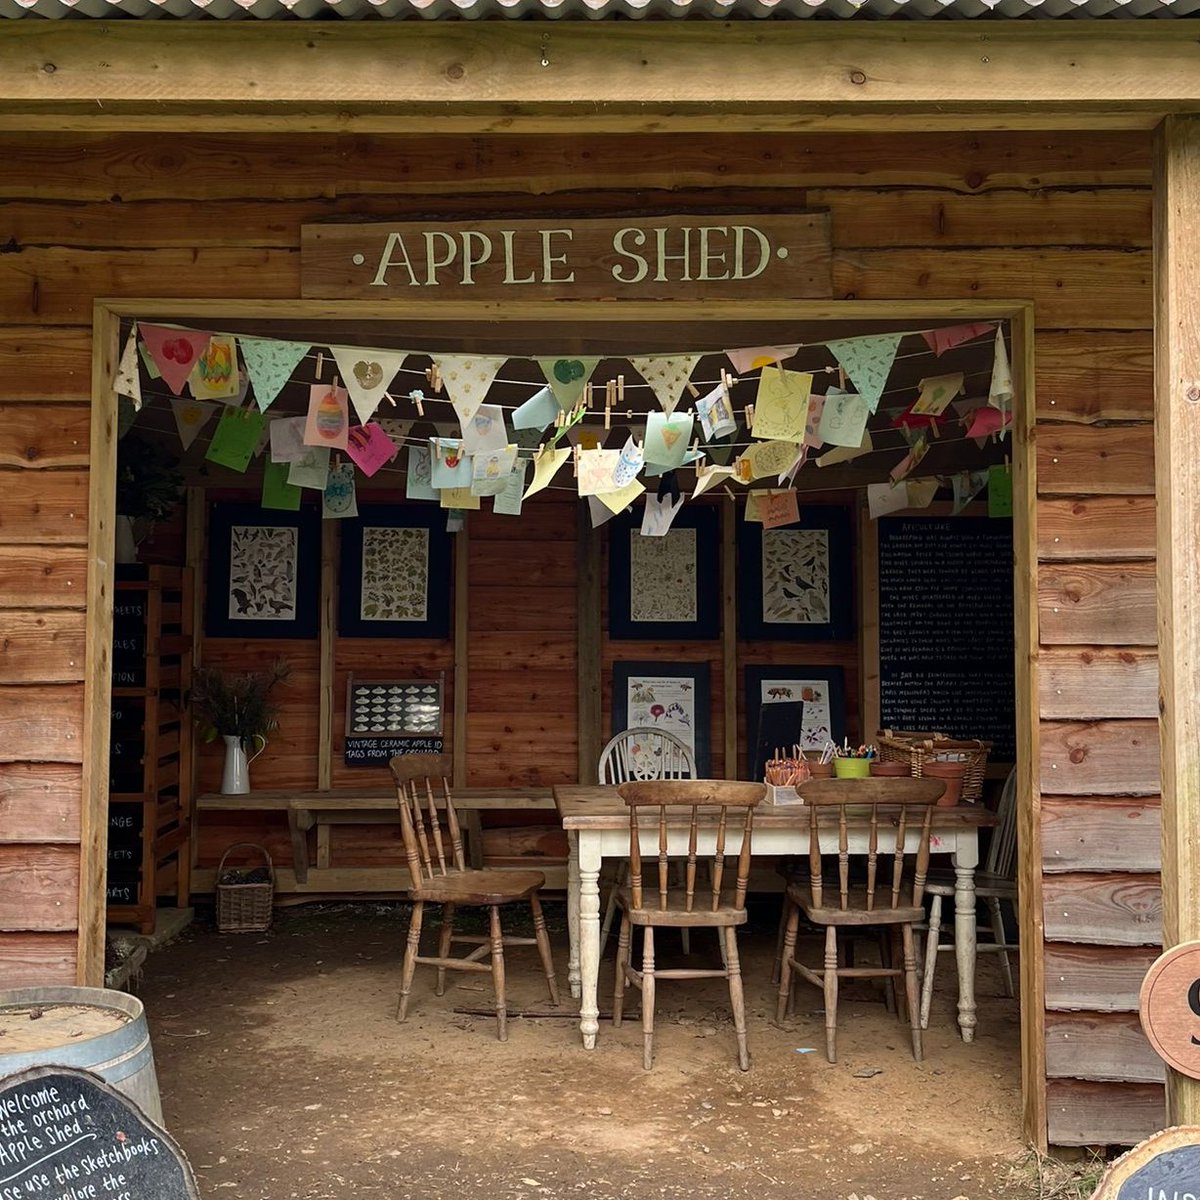 Take a trip to @Nationaltrust Glendurgan Gardens this #Easter and enjoy the arts and crafts in the Apple Shed. With the chance to create some festive bunting, it's the perfect way to spend an afternoon with the whole family.